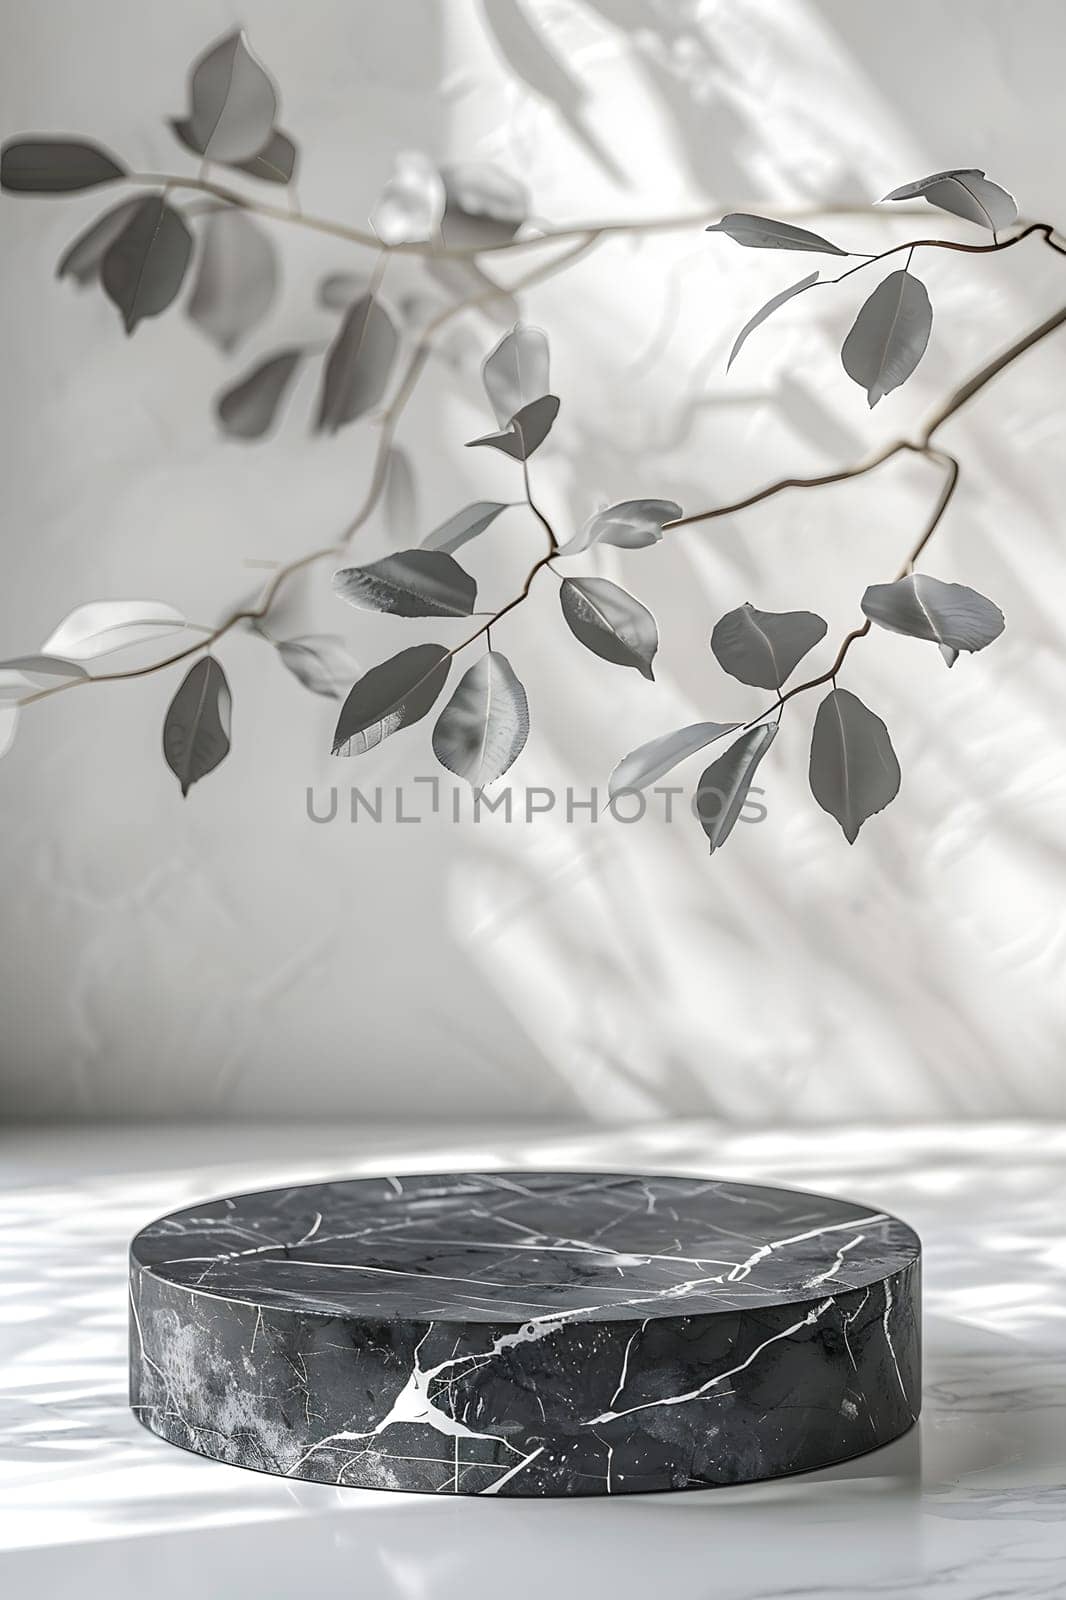 A monochrome photo of a black marble podium adorned with delicate leaves and twigs, showcasing a timeless style with natural materials and a sleek blackandwhite color palette